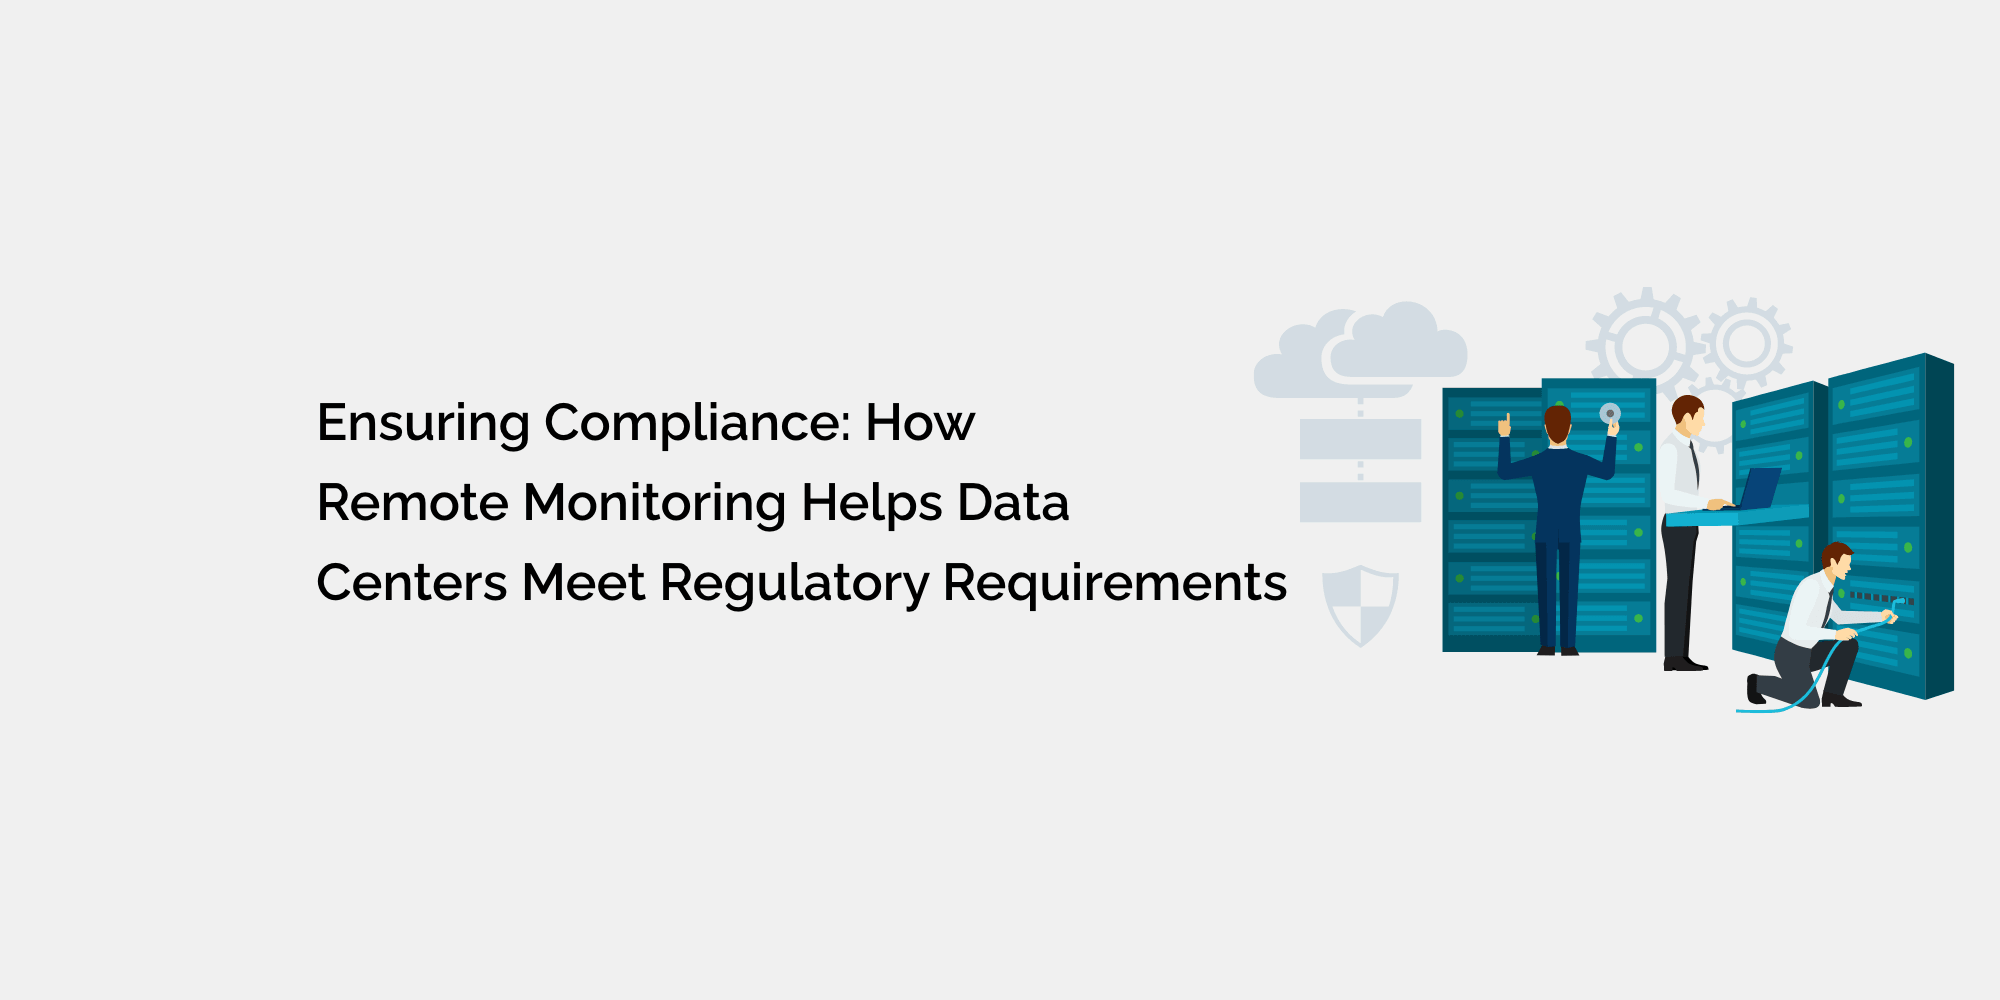 Ensuring Compliance: How Remote Monitoring Helps Data Centers Meet Regulatory Requirements